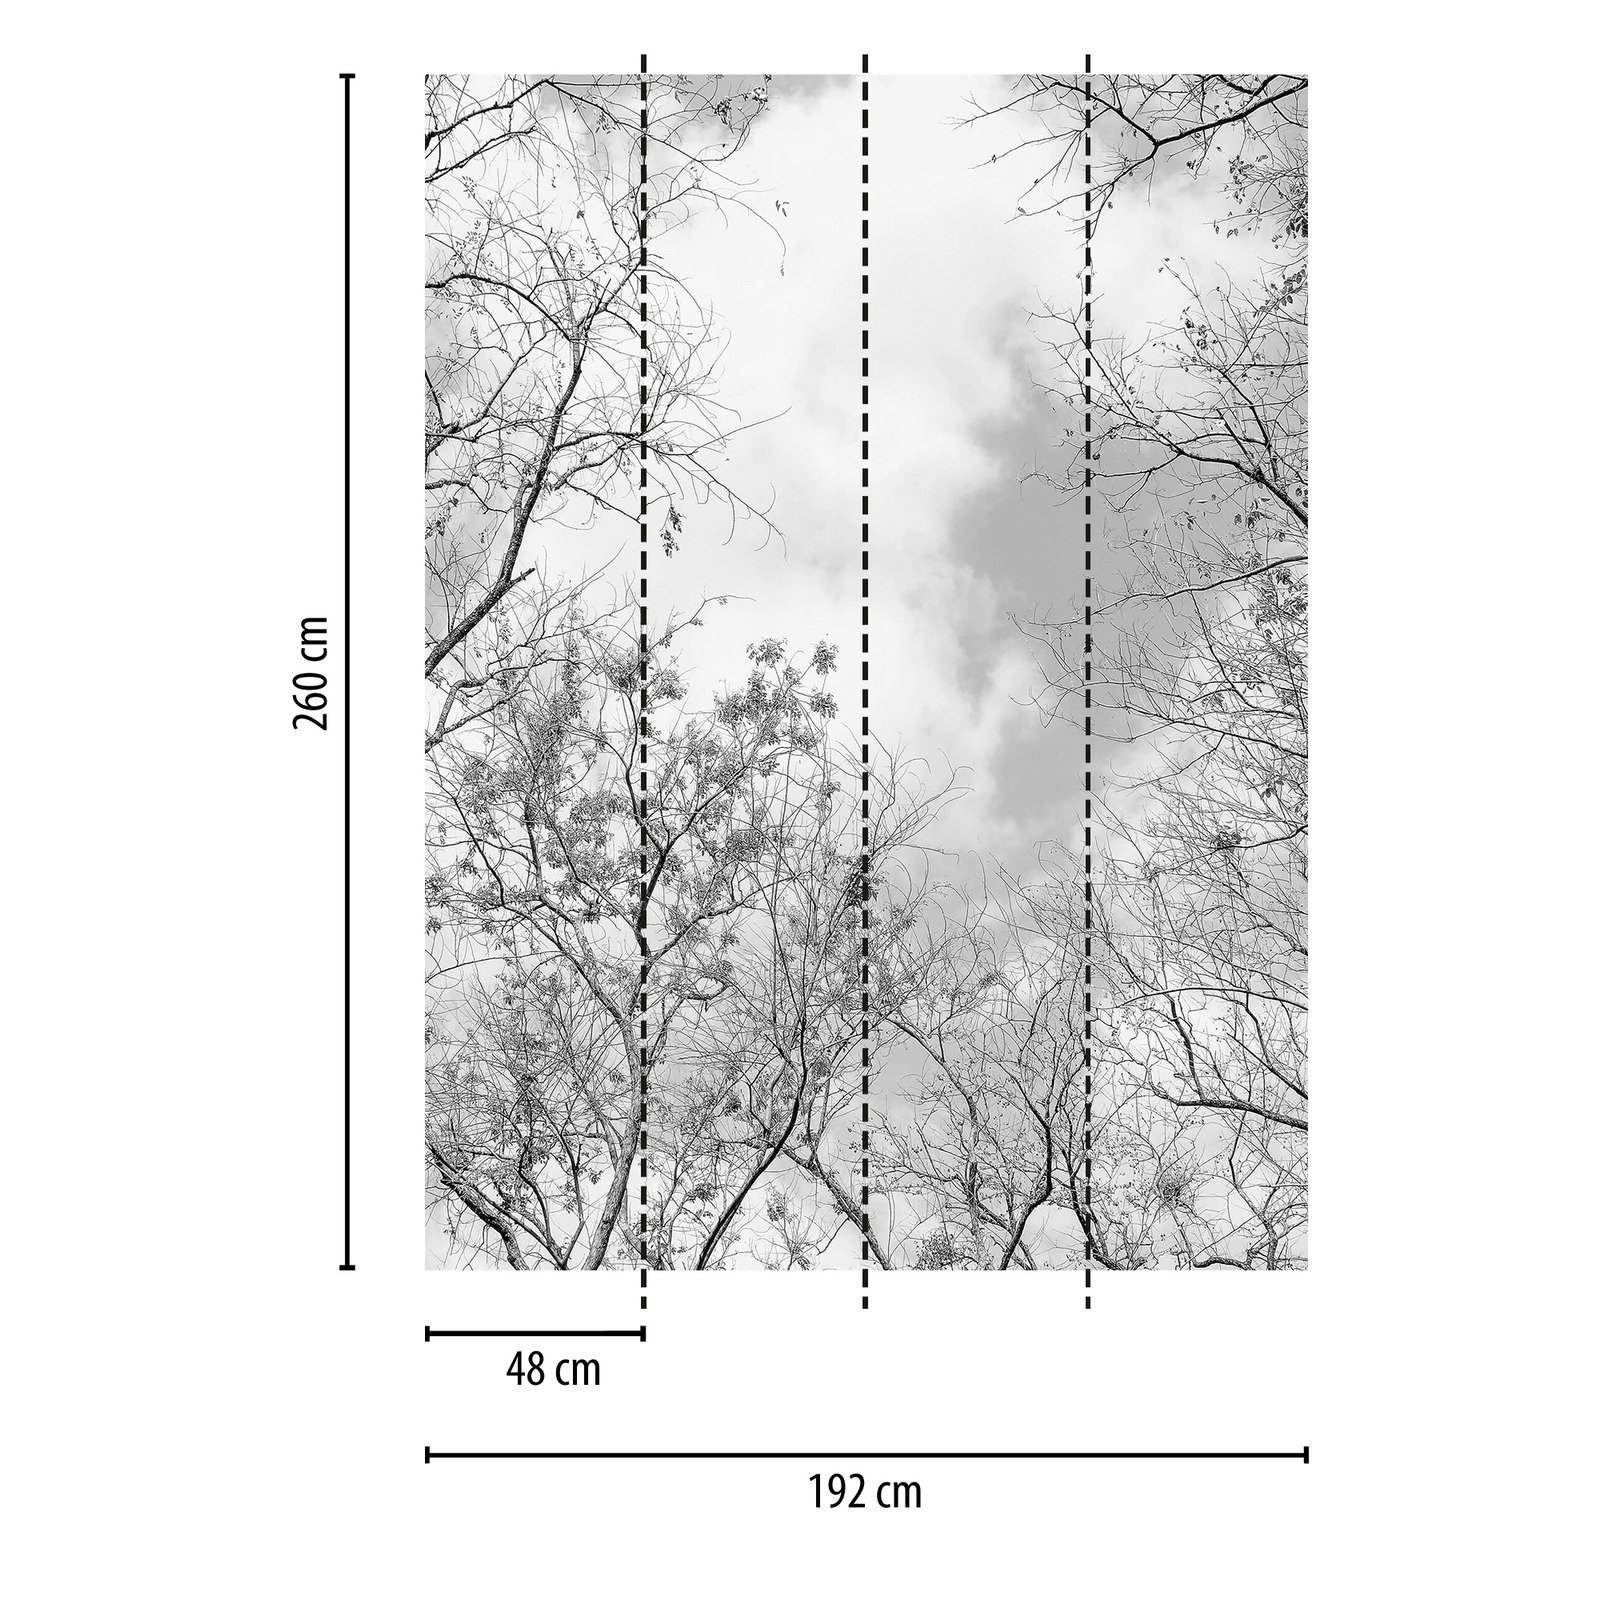             Black and white photo wallpaper trees & sky, portrait format
        